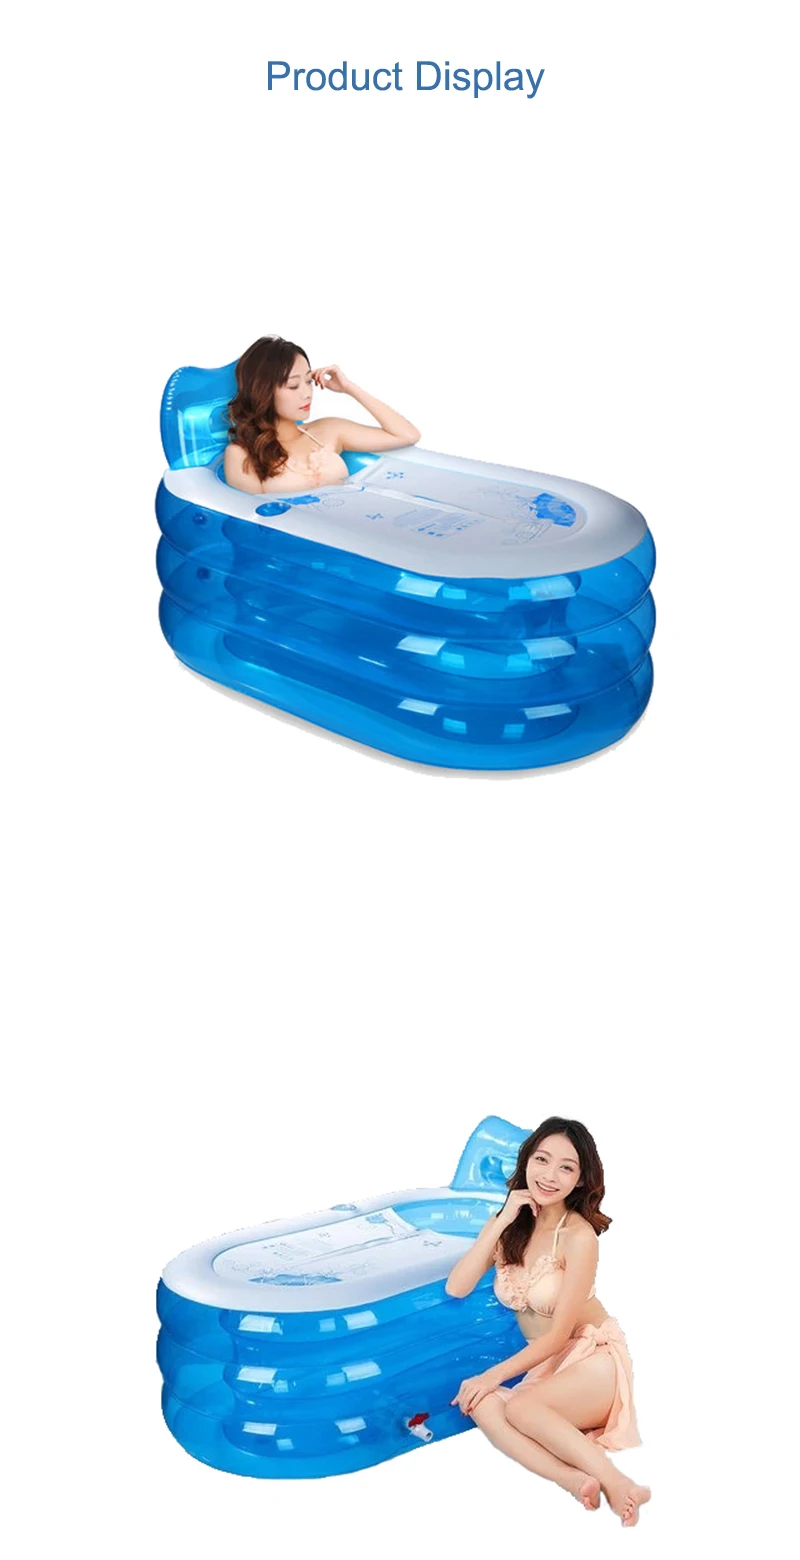 Portable PVC Adult inflatable Bath tub Indoor Outdoor with Stocks Fast Shipping